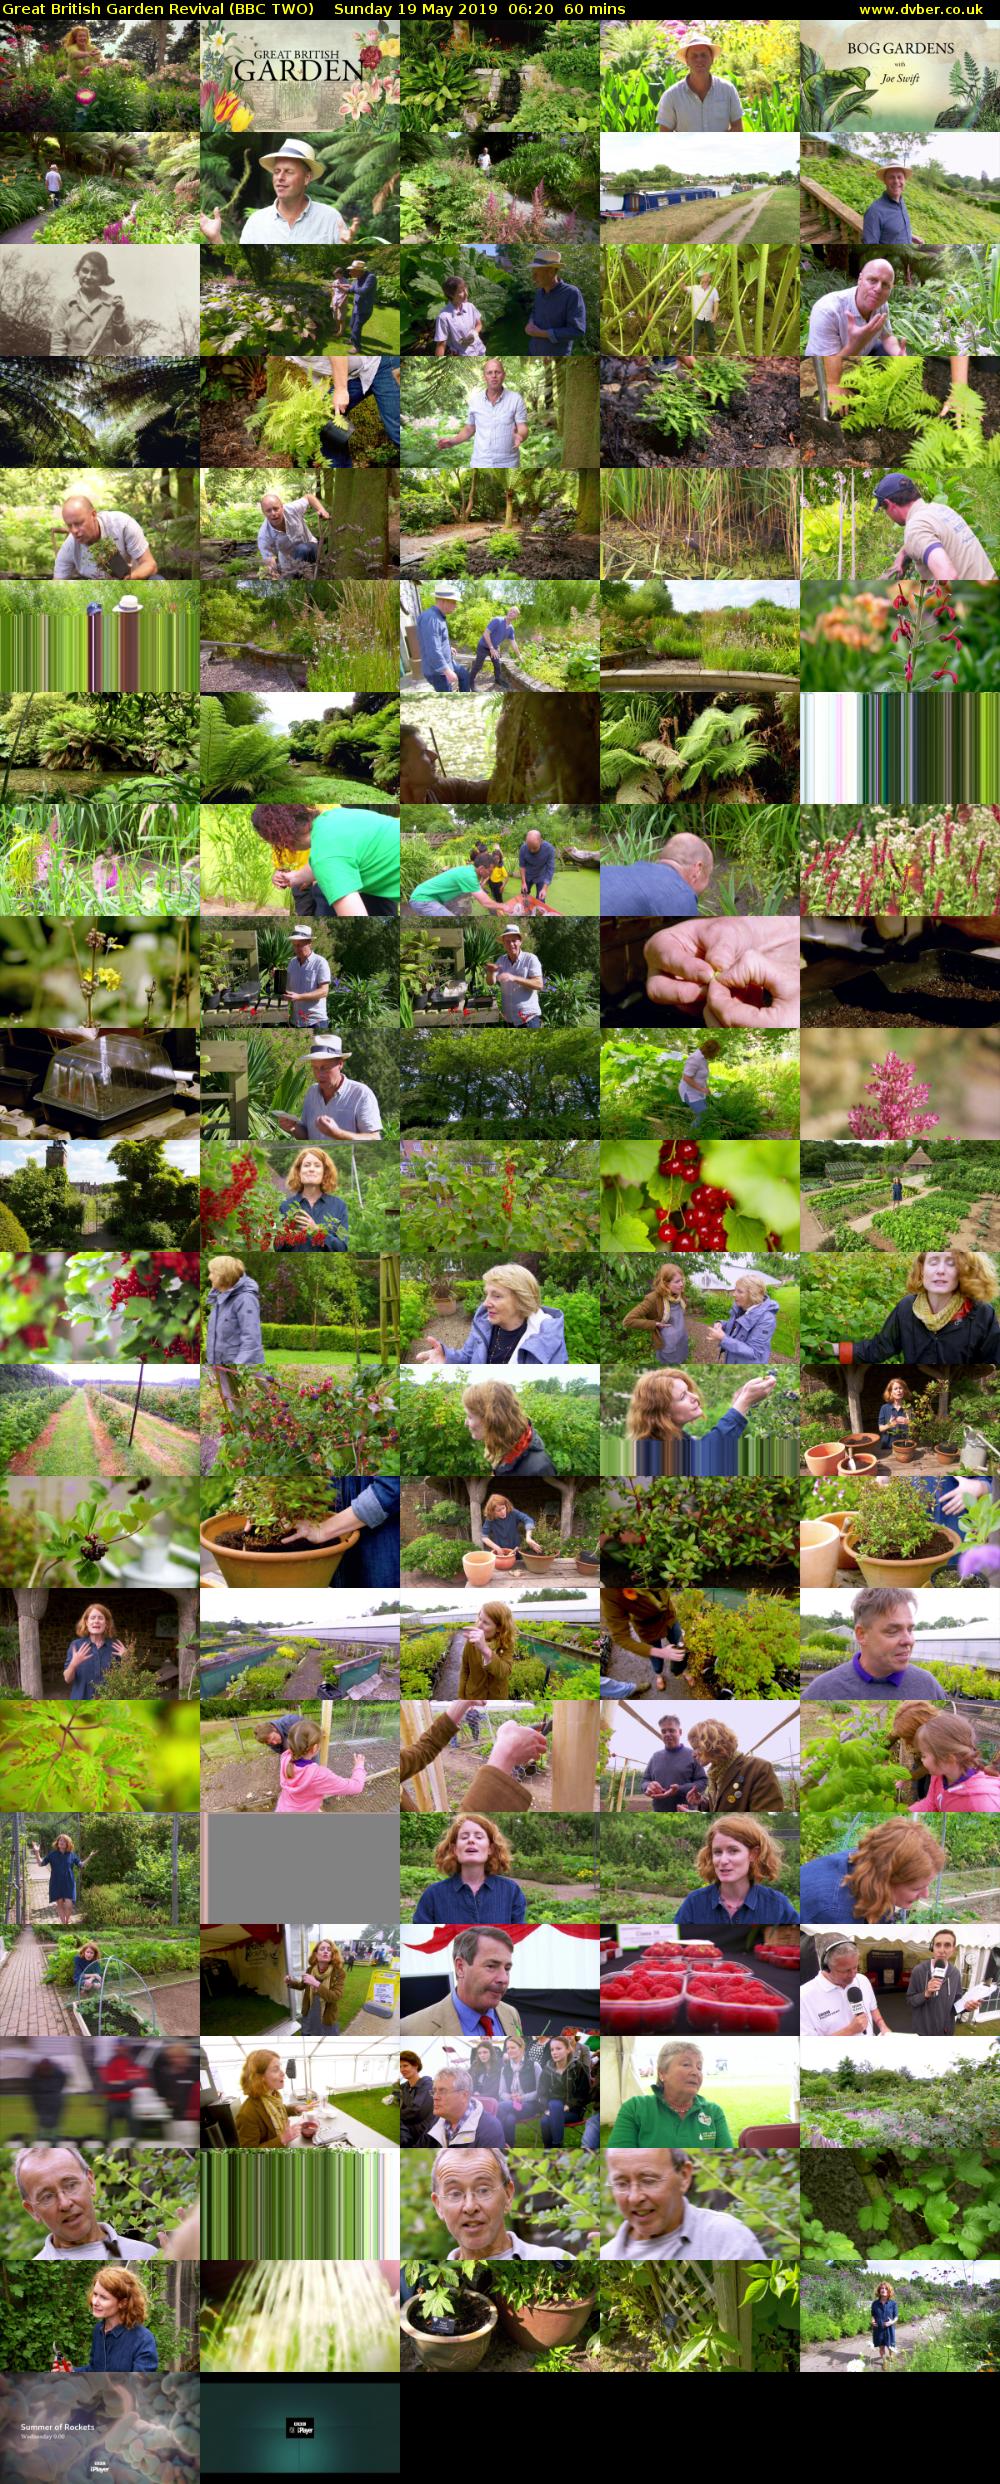 Great British Garden Revival (BBC TWO) Sunday 19 May 2019 06:20 - 07:20